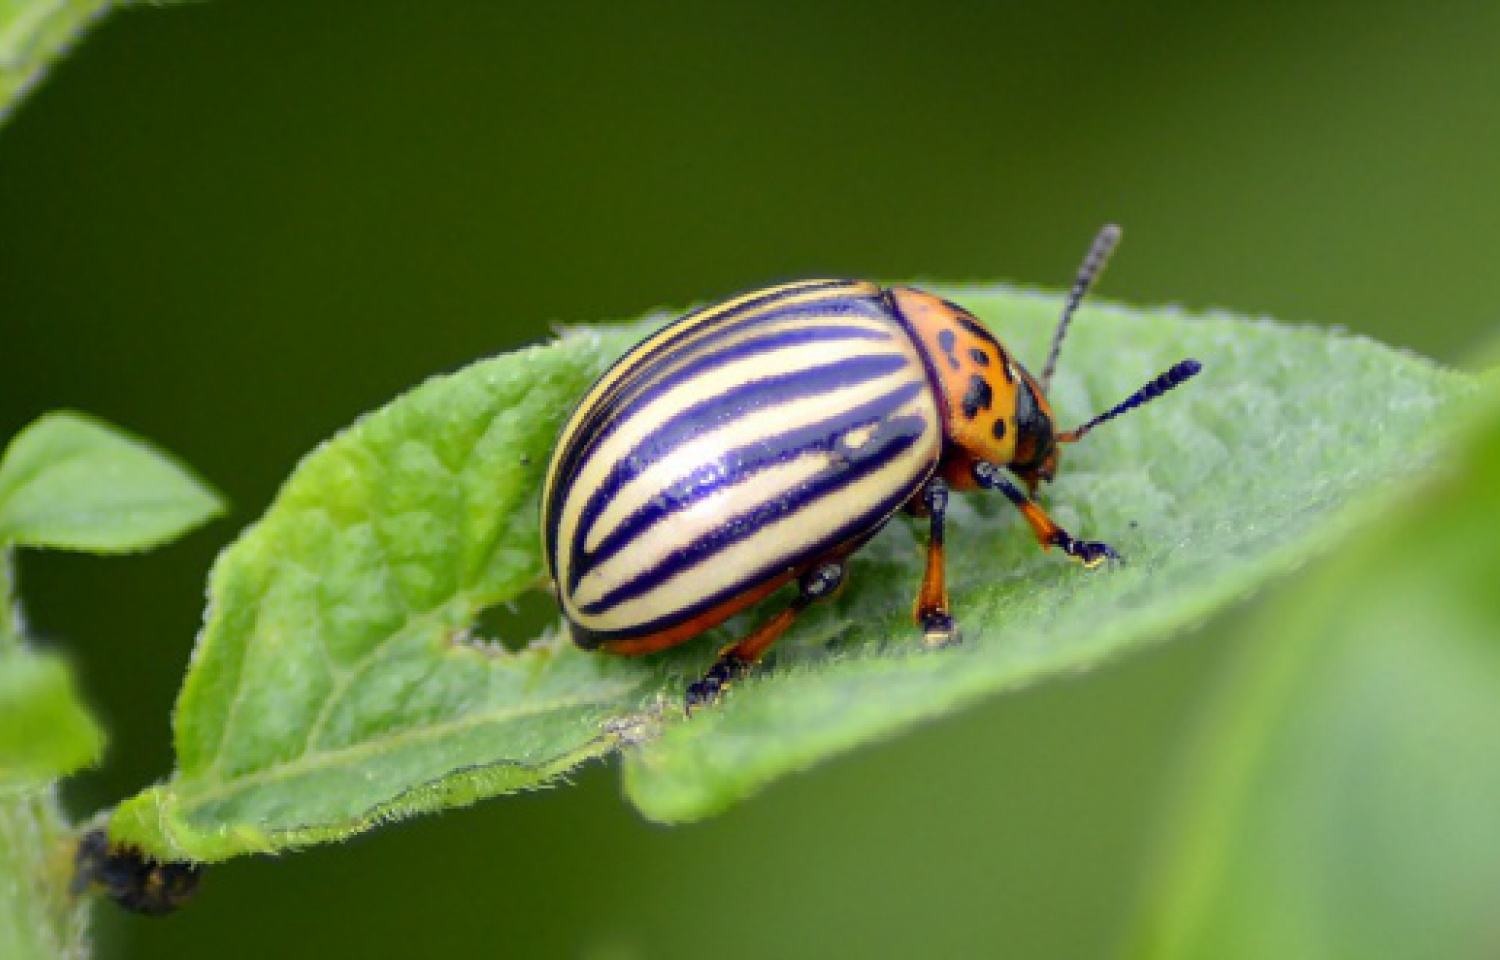 Photo shows a beetle with a red head and black and white stripes on a green leaf.